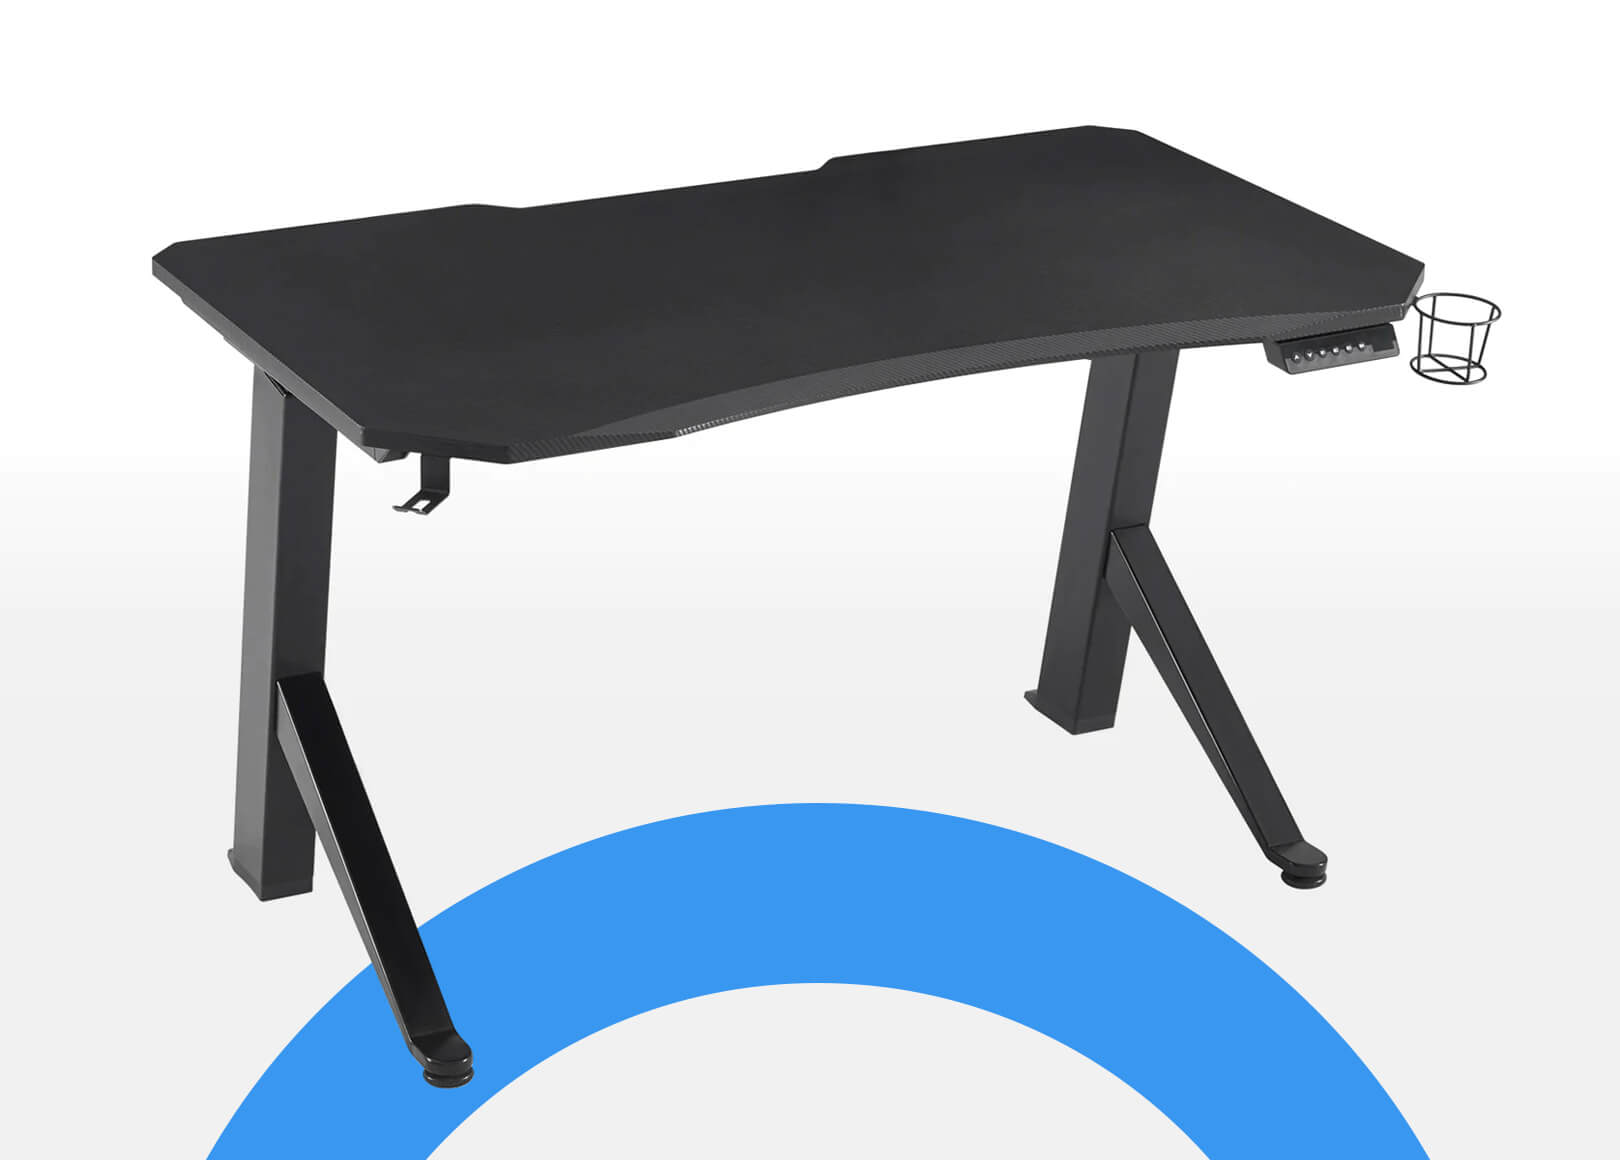 Easy-to-move gaming desk with built-in retracting castors, oblique angle design for sturdiness and high load capacity, anti-skid and oil-proof panel, cable management, headphone hook, and water cup holder. LED digital display controller for precise height control. SGS certified for low formaldehyde emission. Enhance your gaming experience with the Sunaofe Gaming Standing Desk-Challenger.